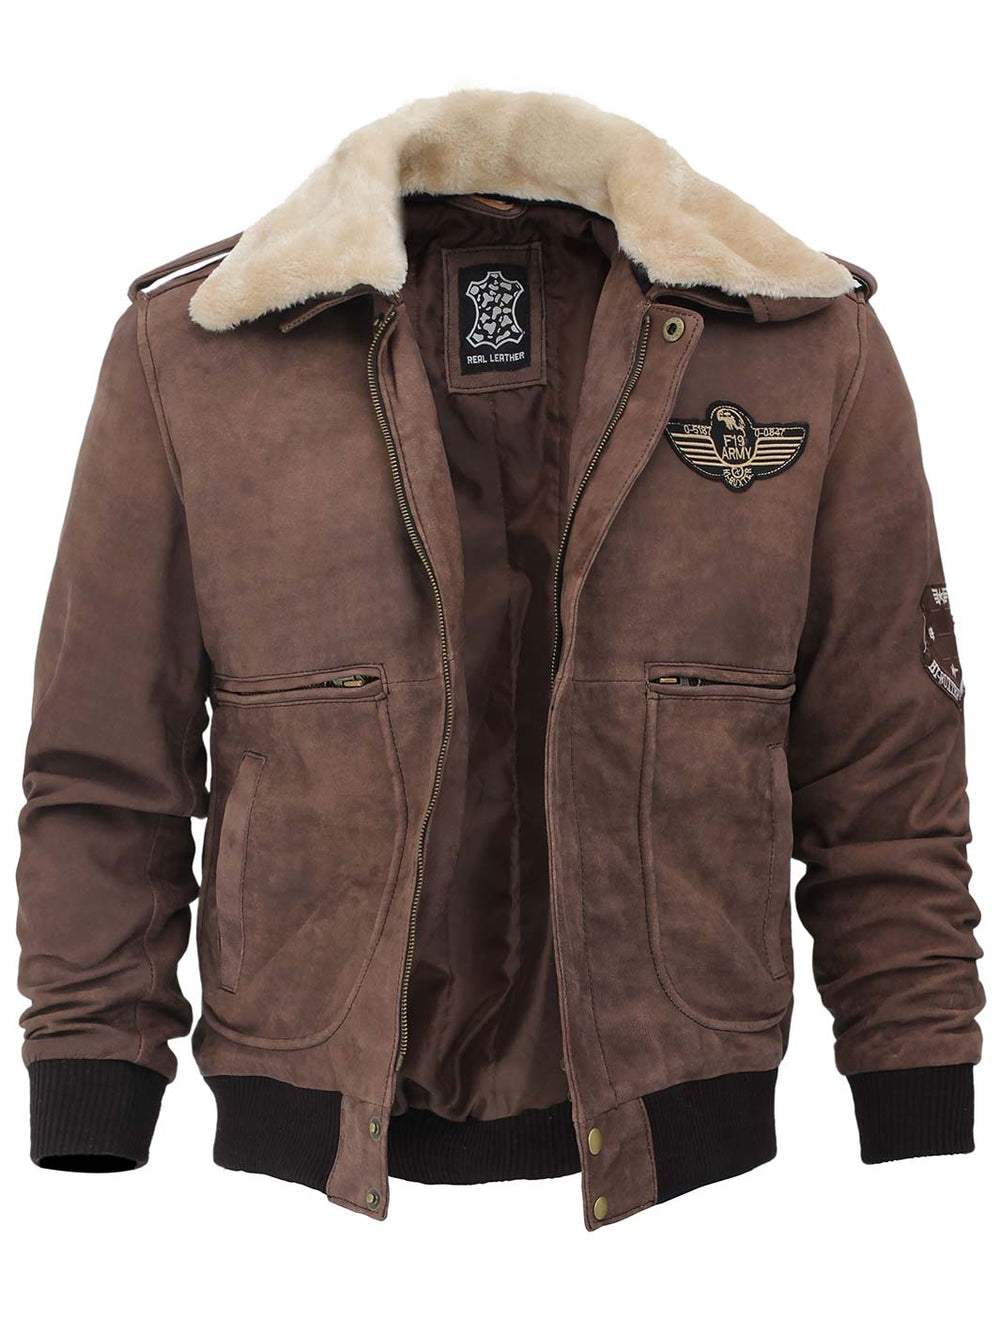 Shearling Bomber Brown Suede Leather Jacket